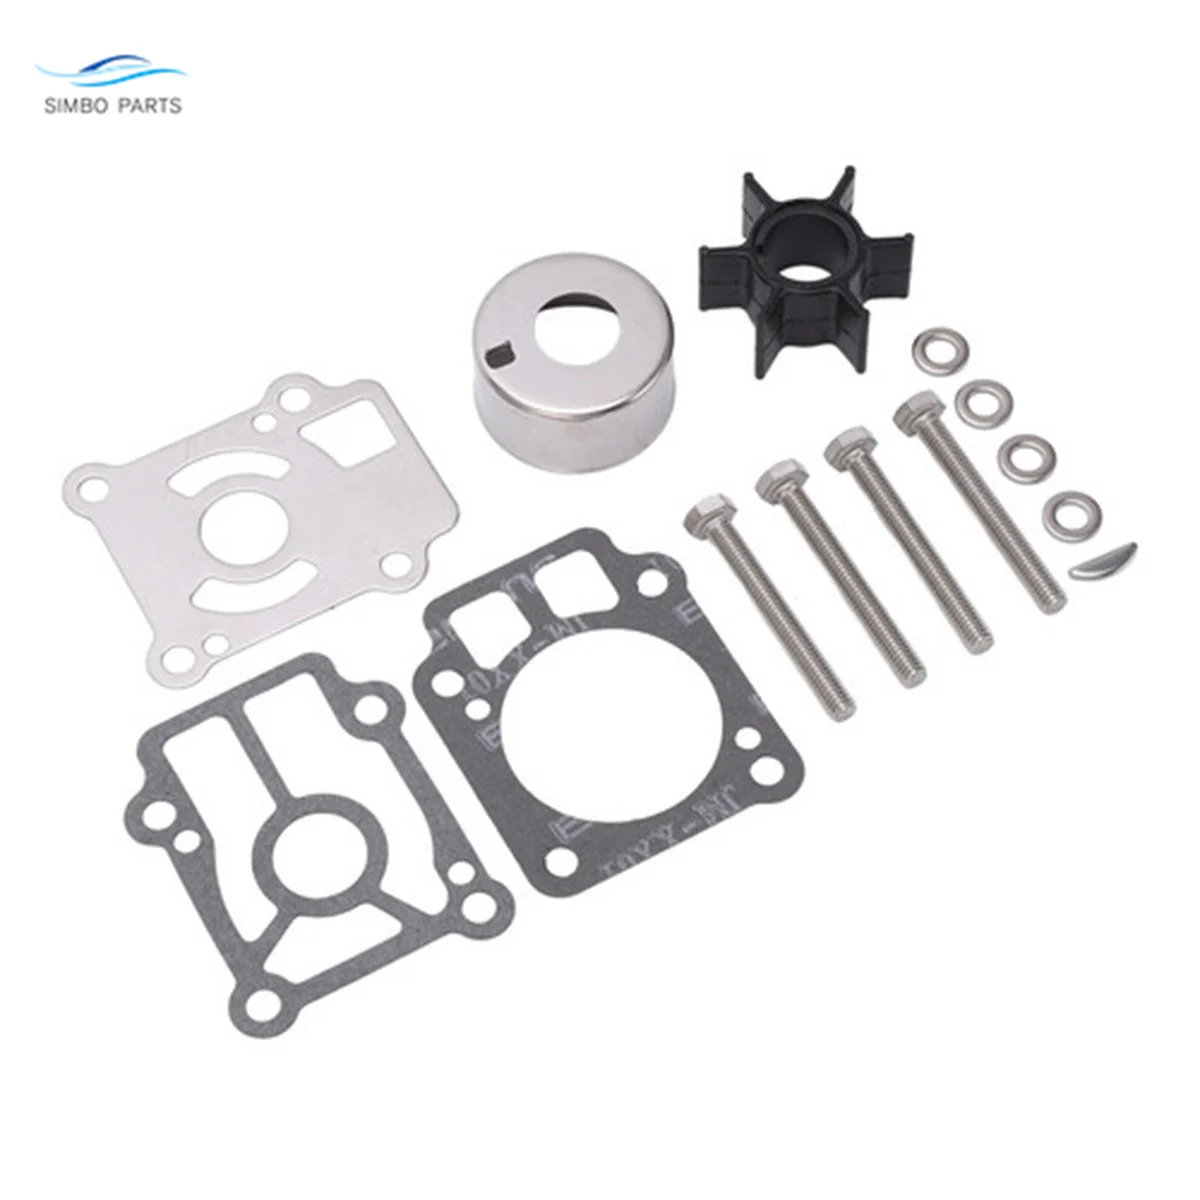 

Water Pump Impeller Kit For Tohatsu Outboard M25C3 M30A4 M40C 361-87322